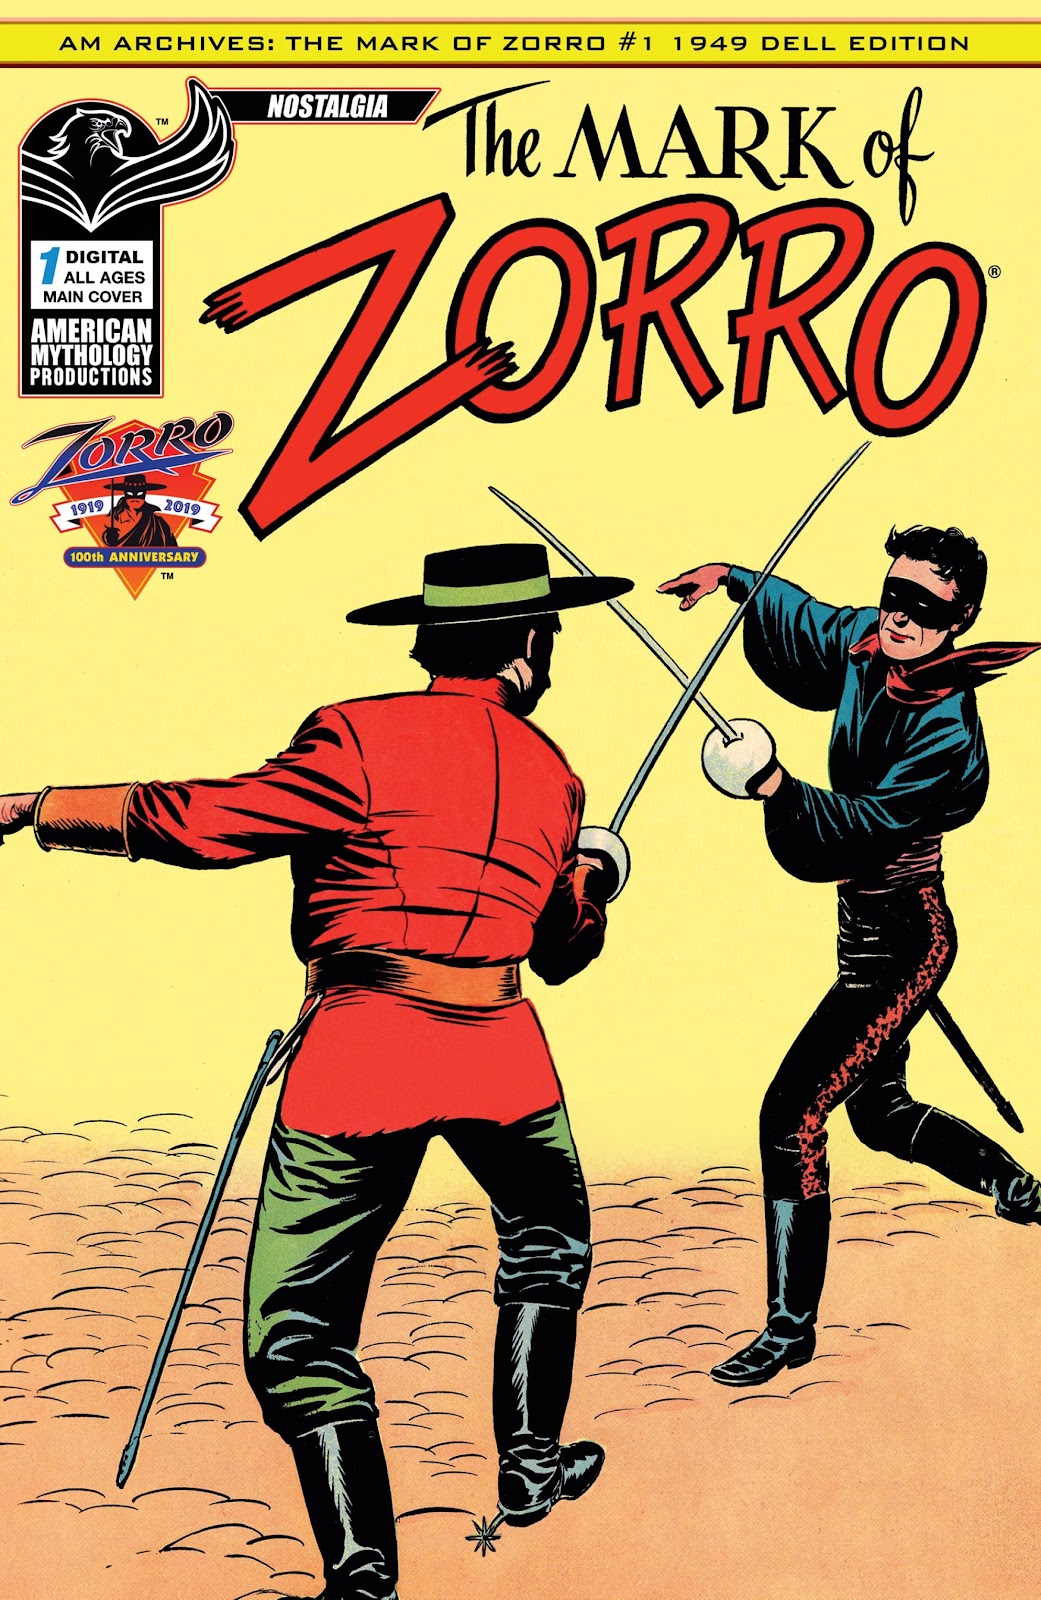 Read online AM Archives: The Mark of Zorro #1 1949 Dell Edition comic -  Issue #1 1949 Dell Edition Full - 1